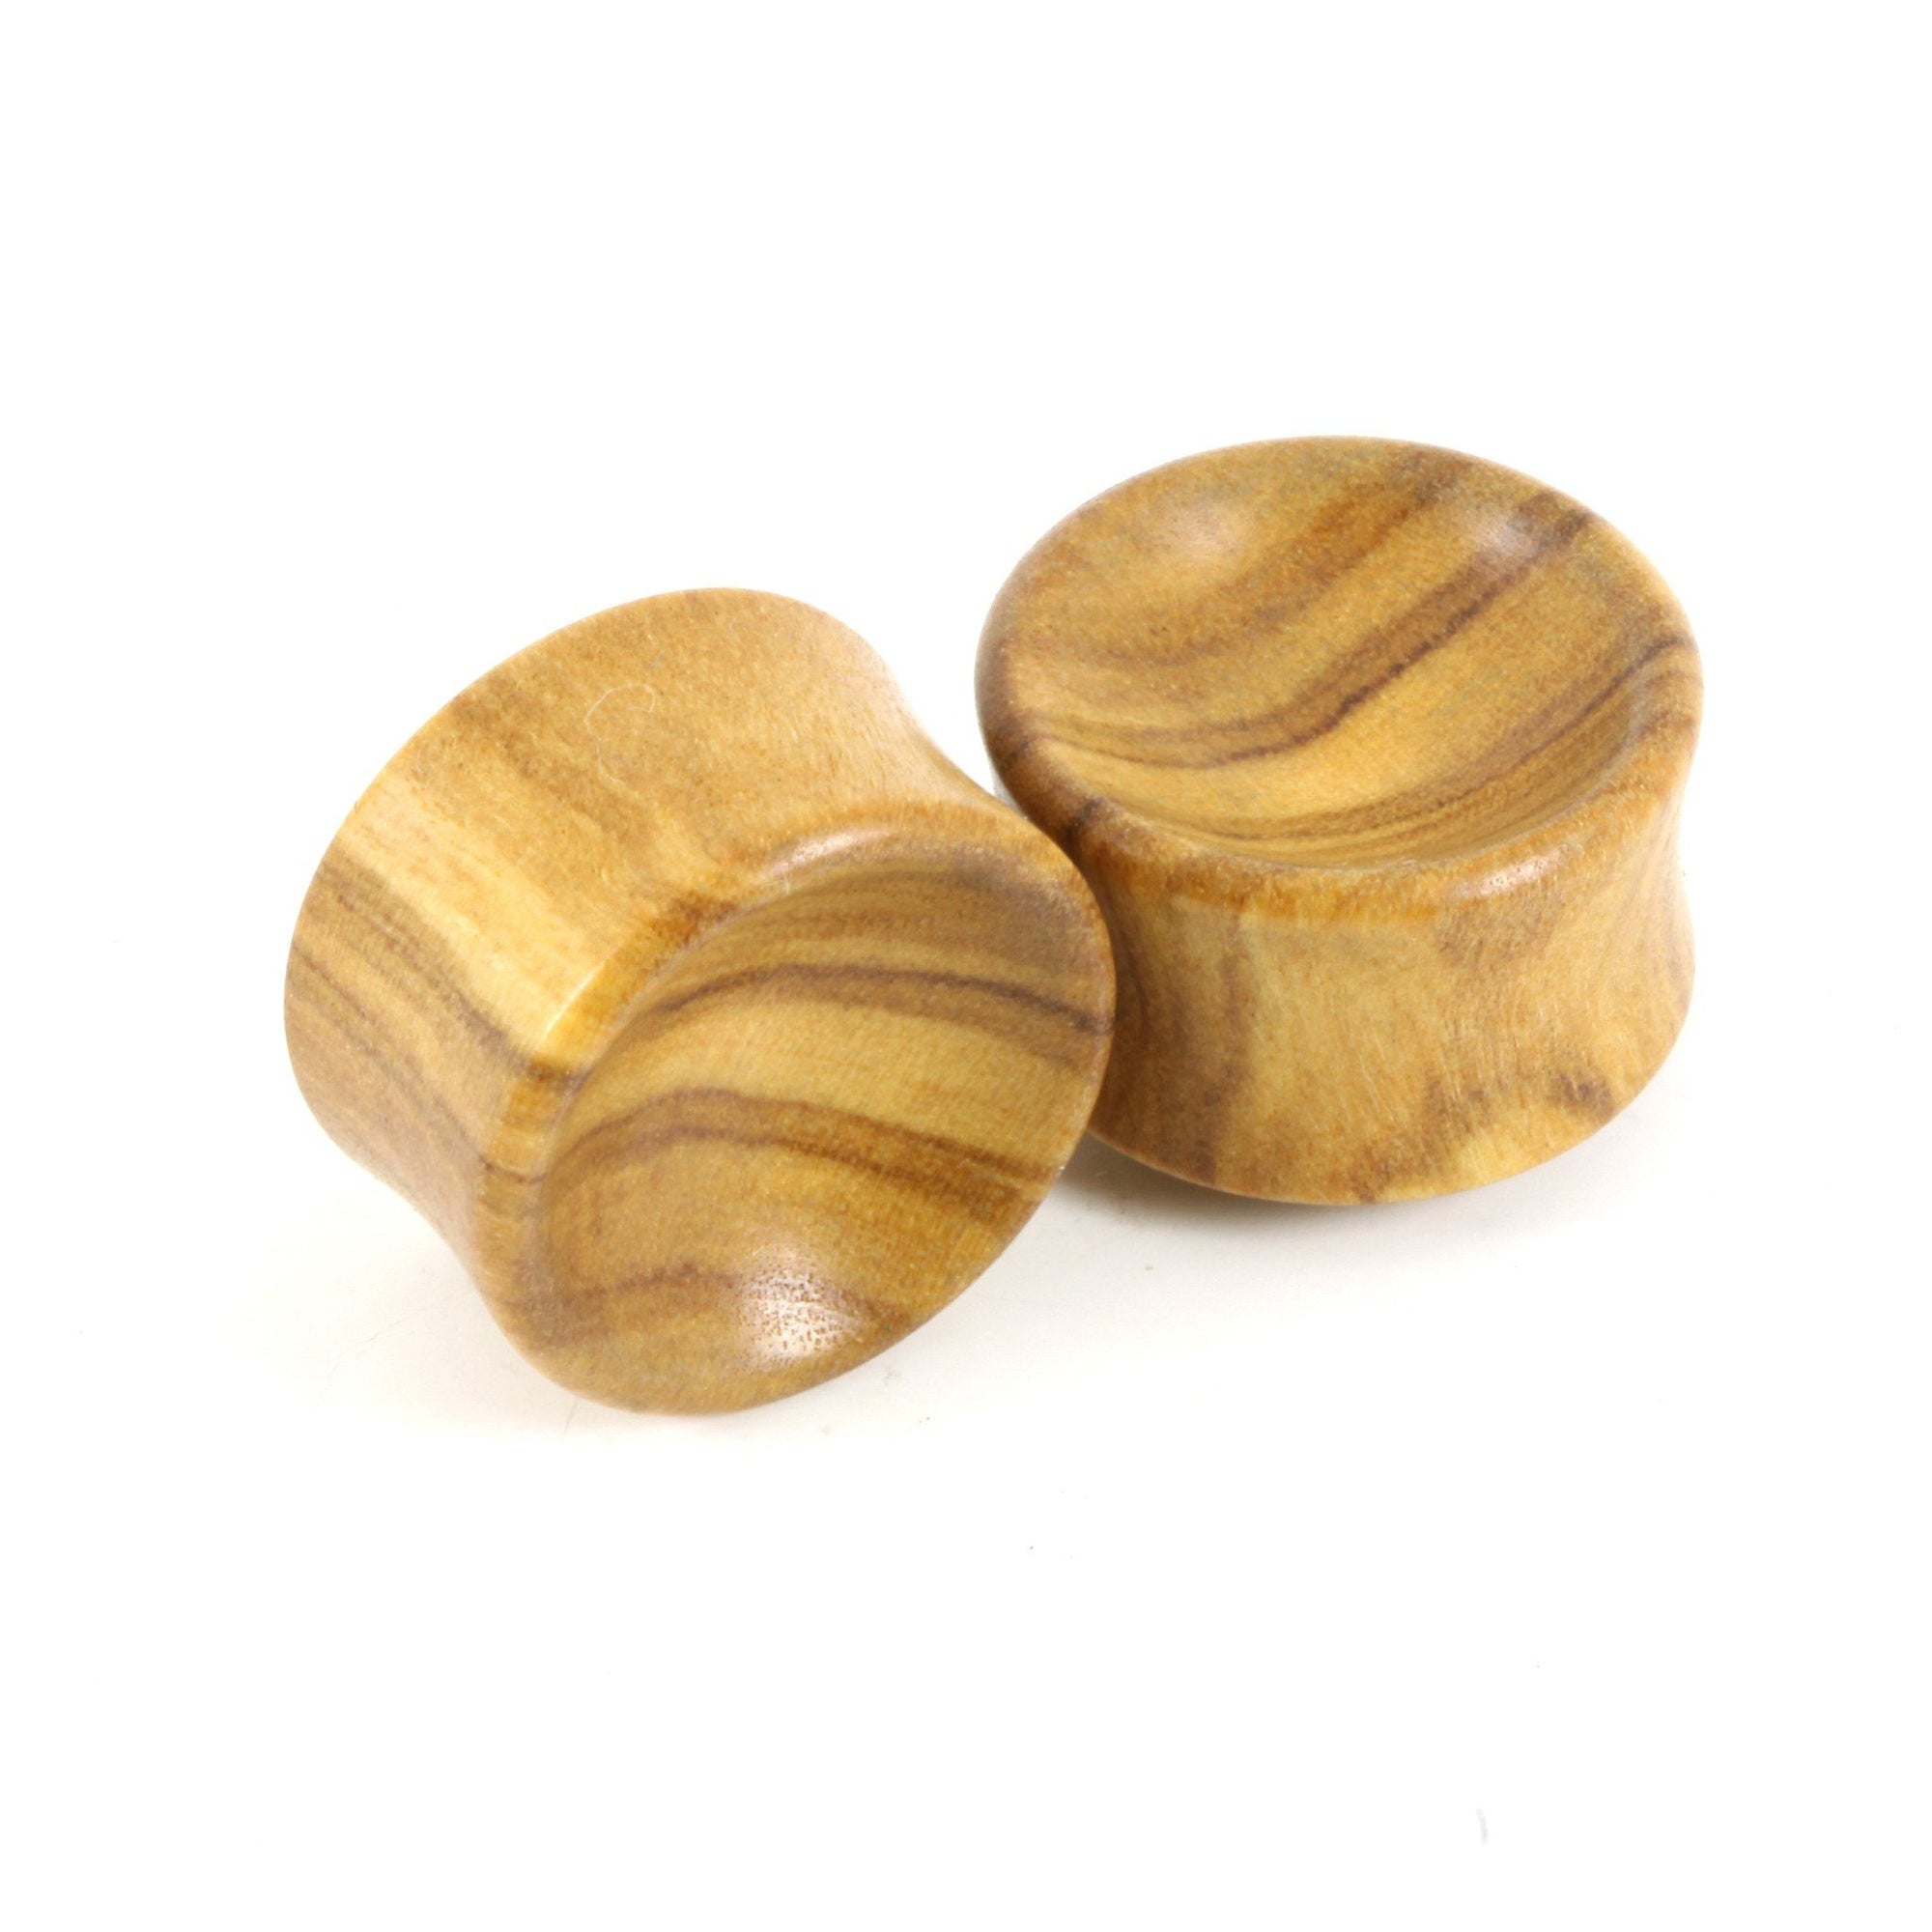 Olivewood Bowl Plugs, jewellery, body jewellery. - Southshore Adornments 